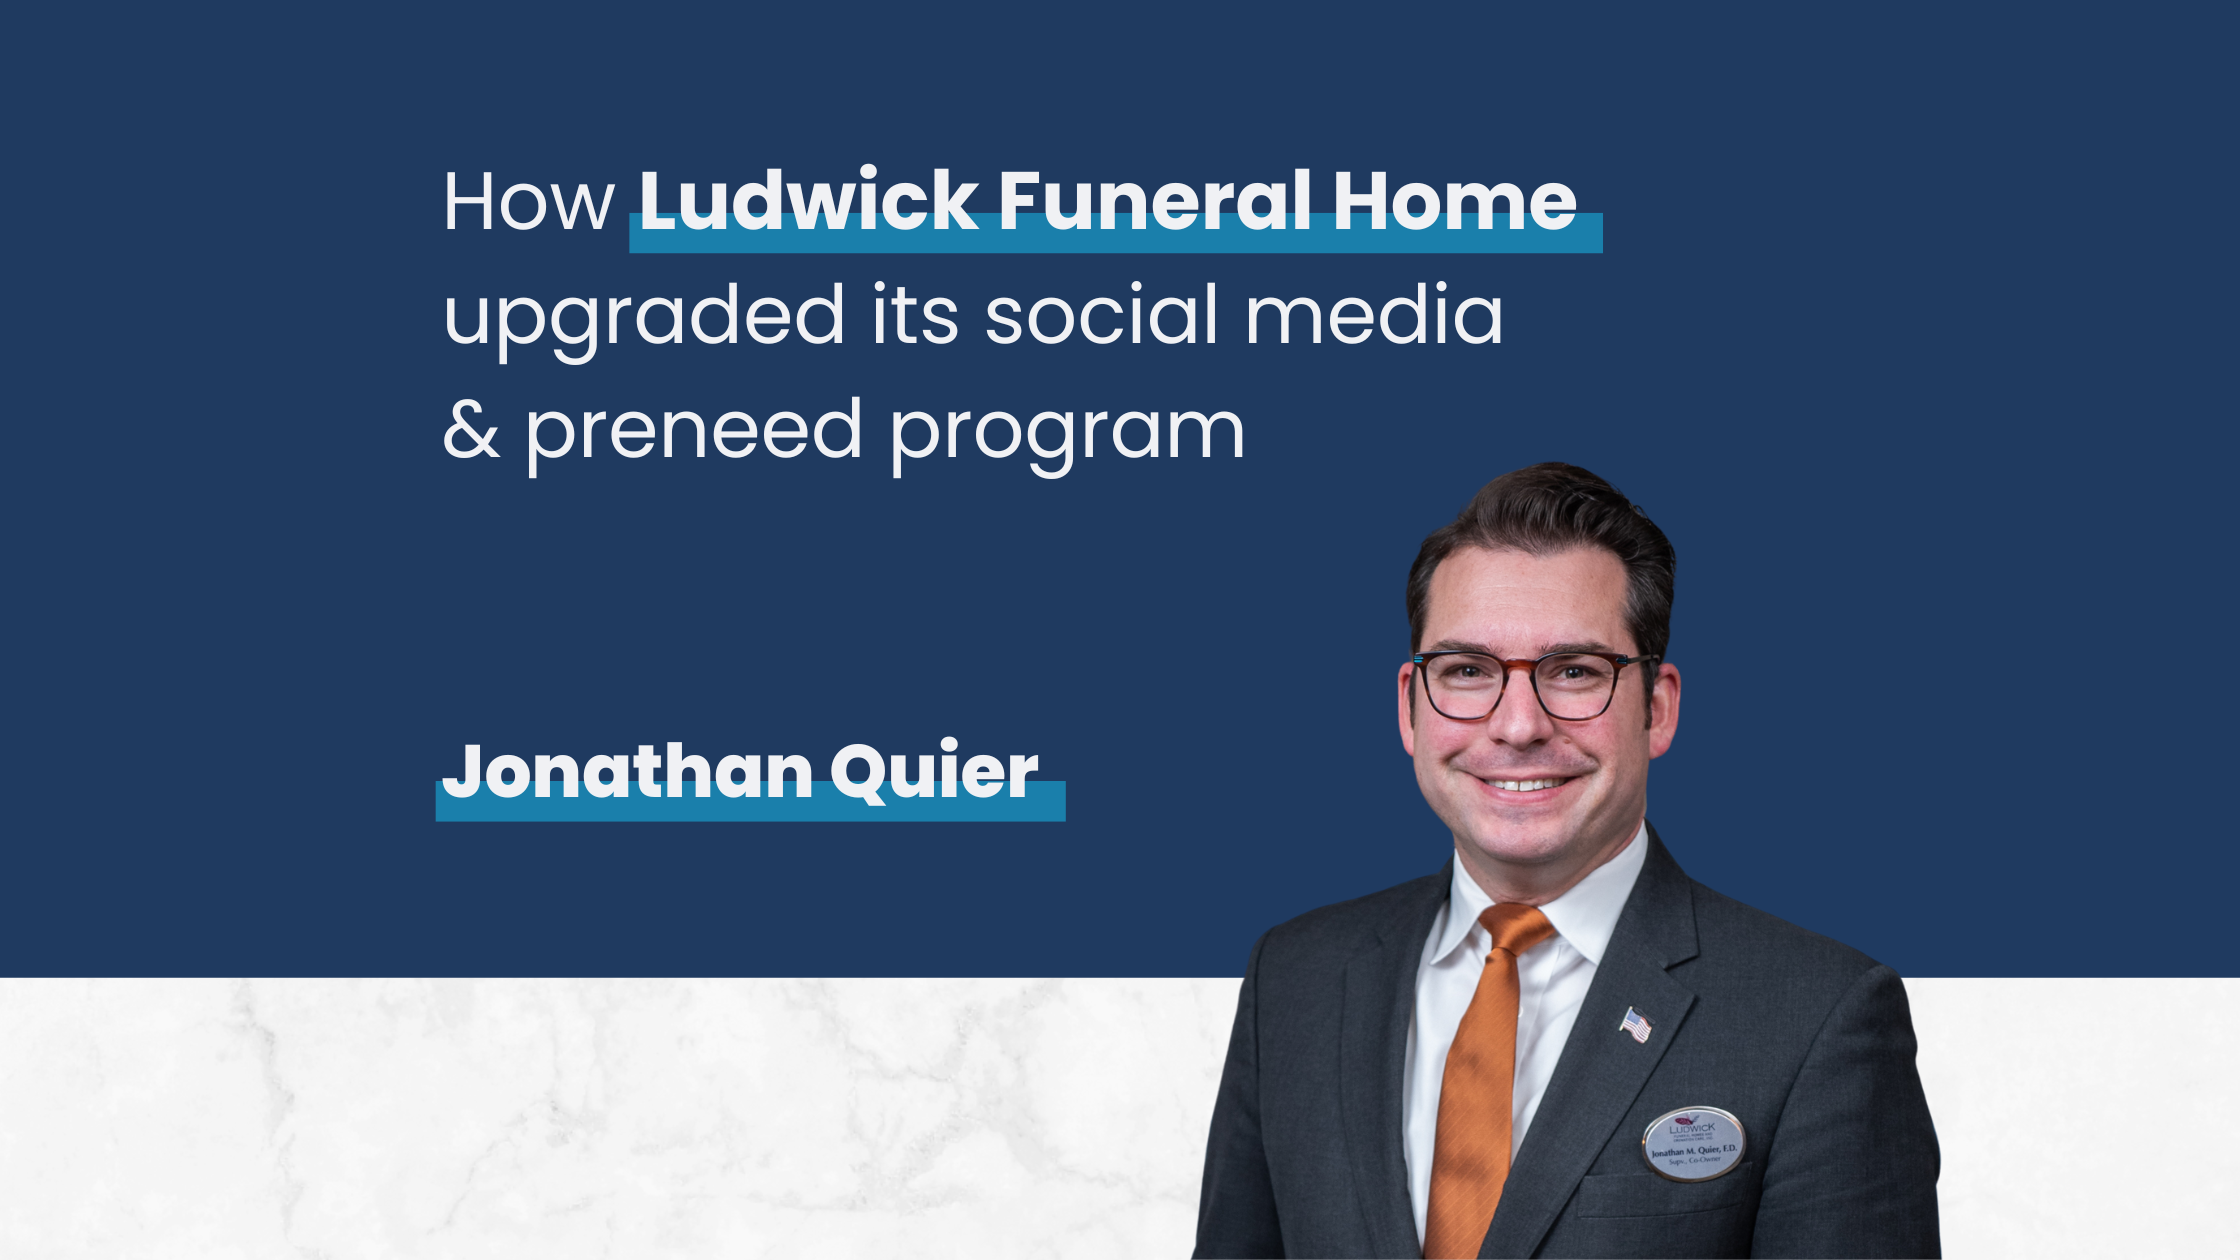 Ludwick funeral home